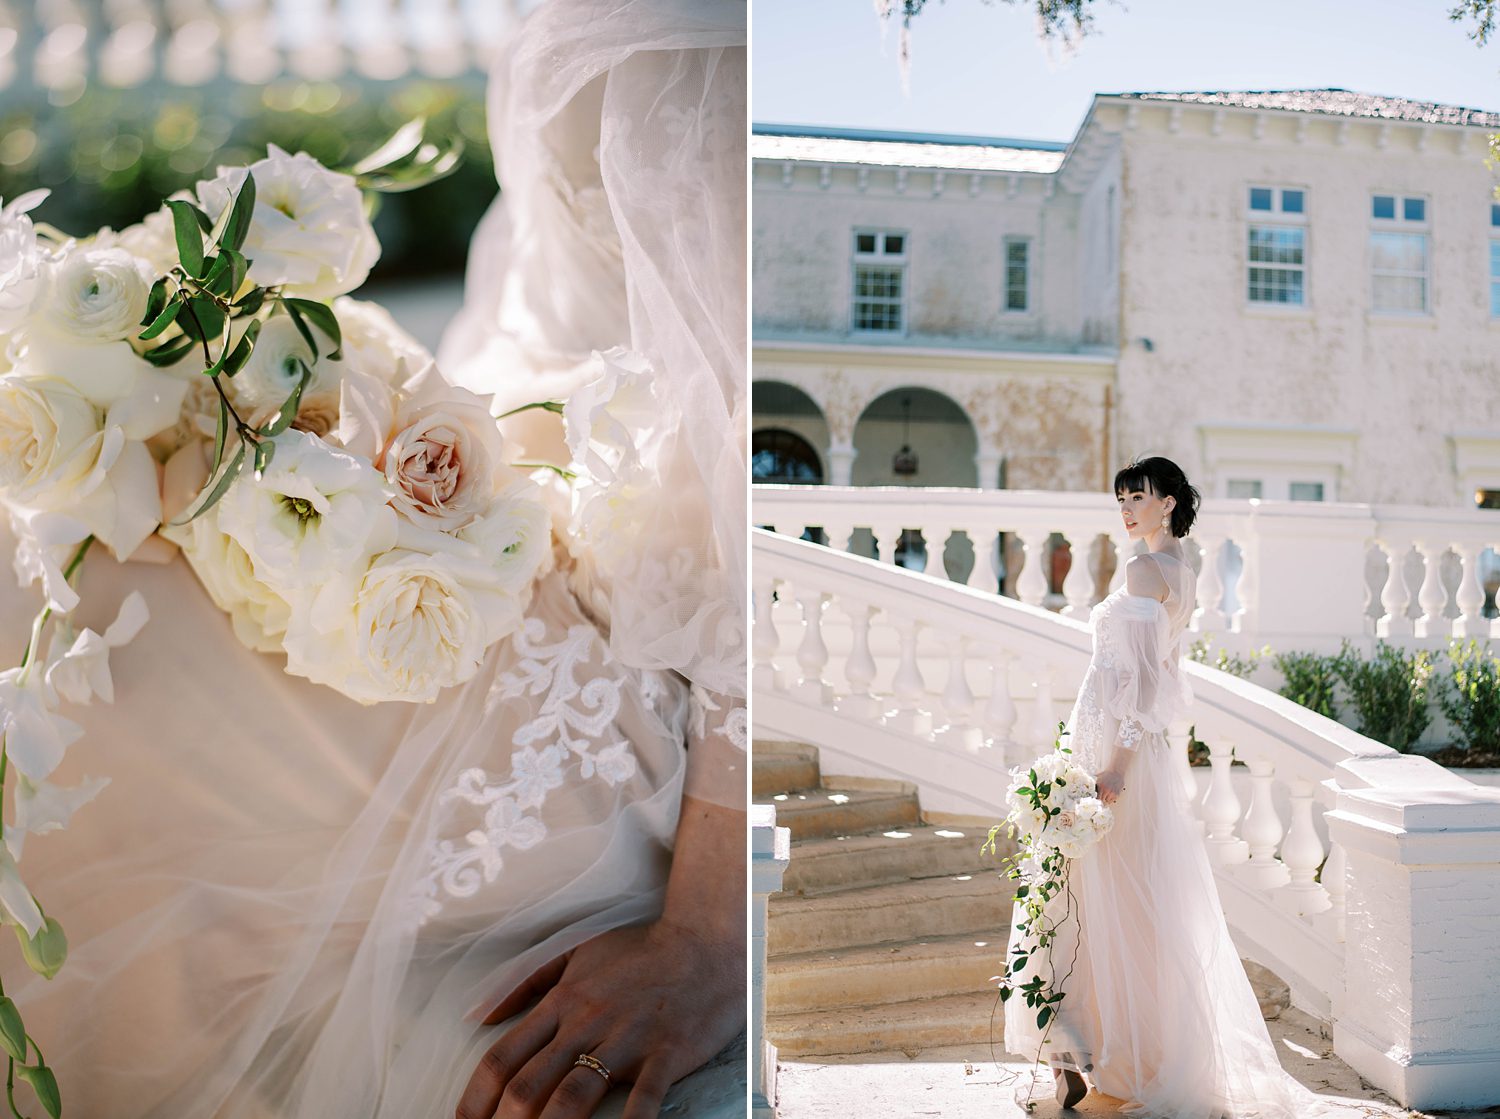 Florida wedding photographer Ruth Terrero shares 5 reasons to hire a wedding planner for a stress-free luxury wedding day